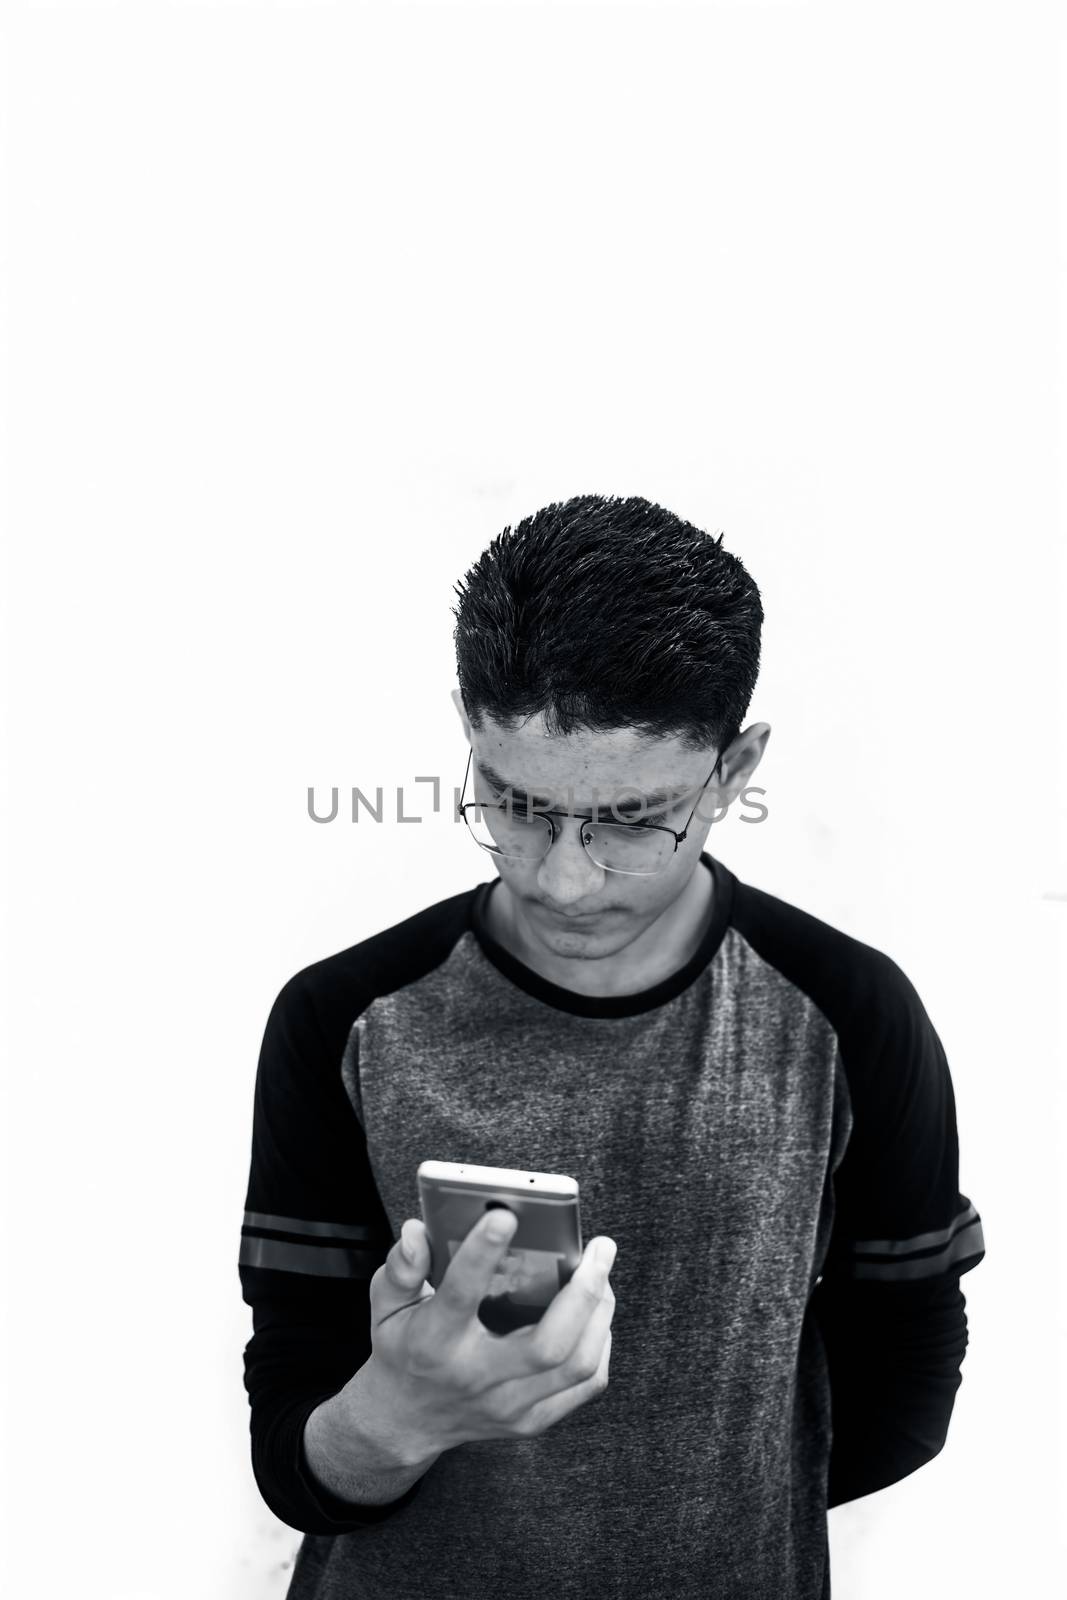 Portrait shot of young teenager wearing black colored t-shirt and using cell phone and posing or expressing various expressions on his face isolated on white.